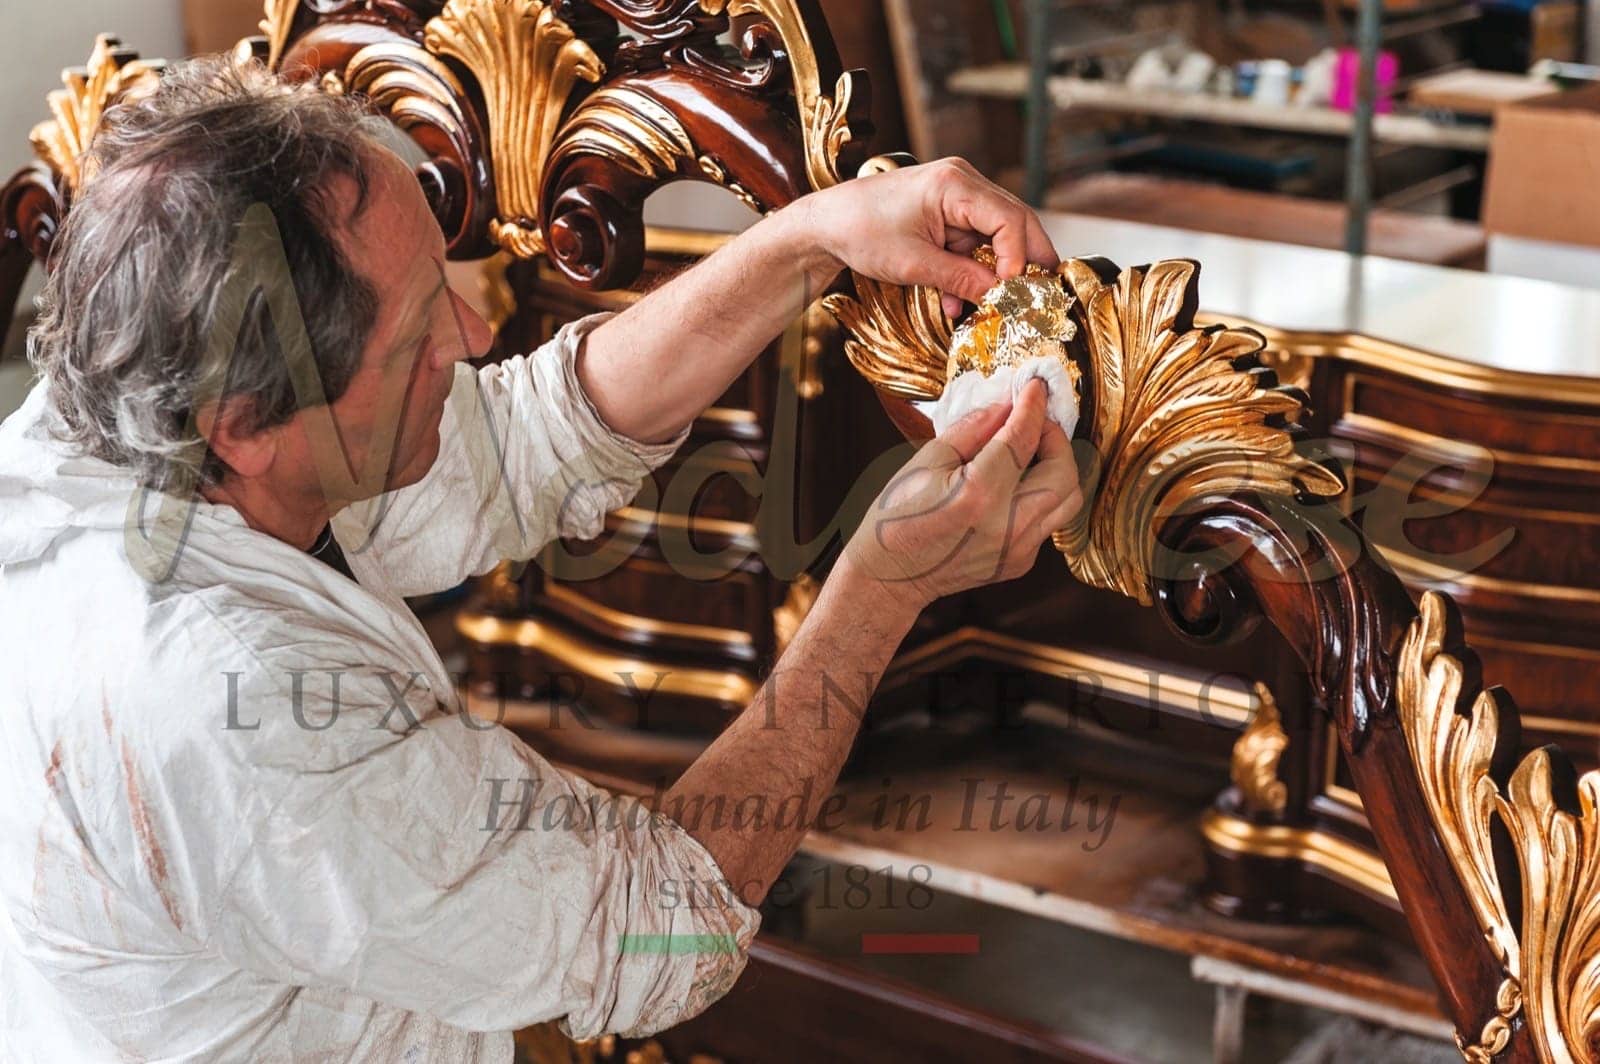 gold leaf application traditional furniture royal classic baroque Venetian style handmade decoration artisans craftsmanship Italian décor villa royal palace residential projects high end quality solid wood materials 24k golden carved solid wood oak walnut attention to details talented artisan best skills